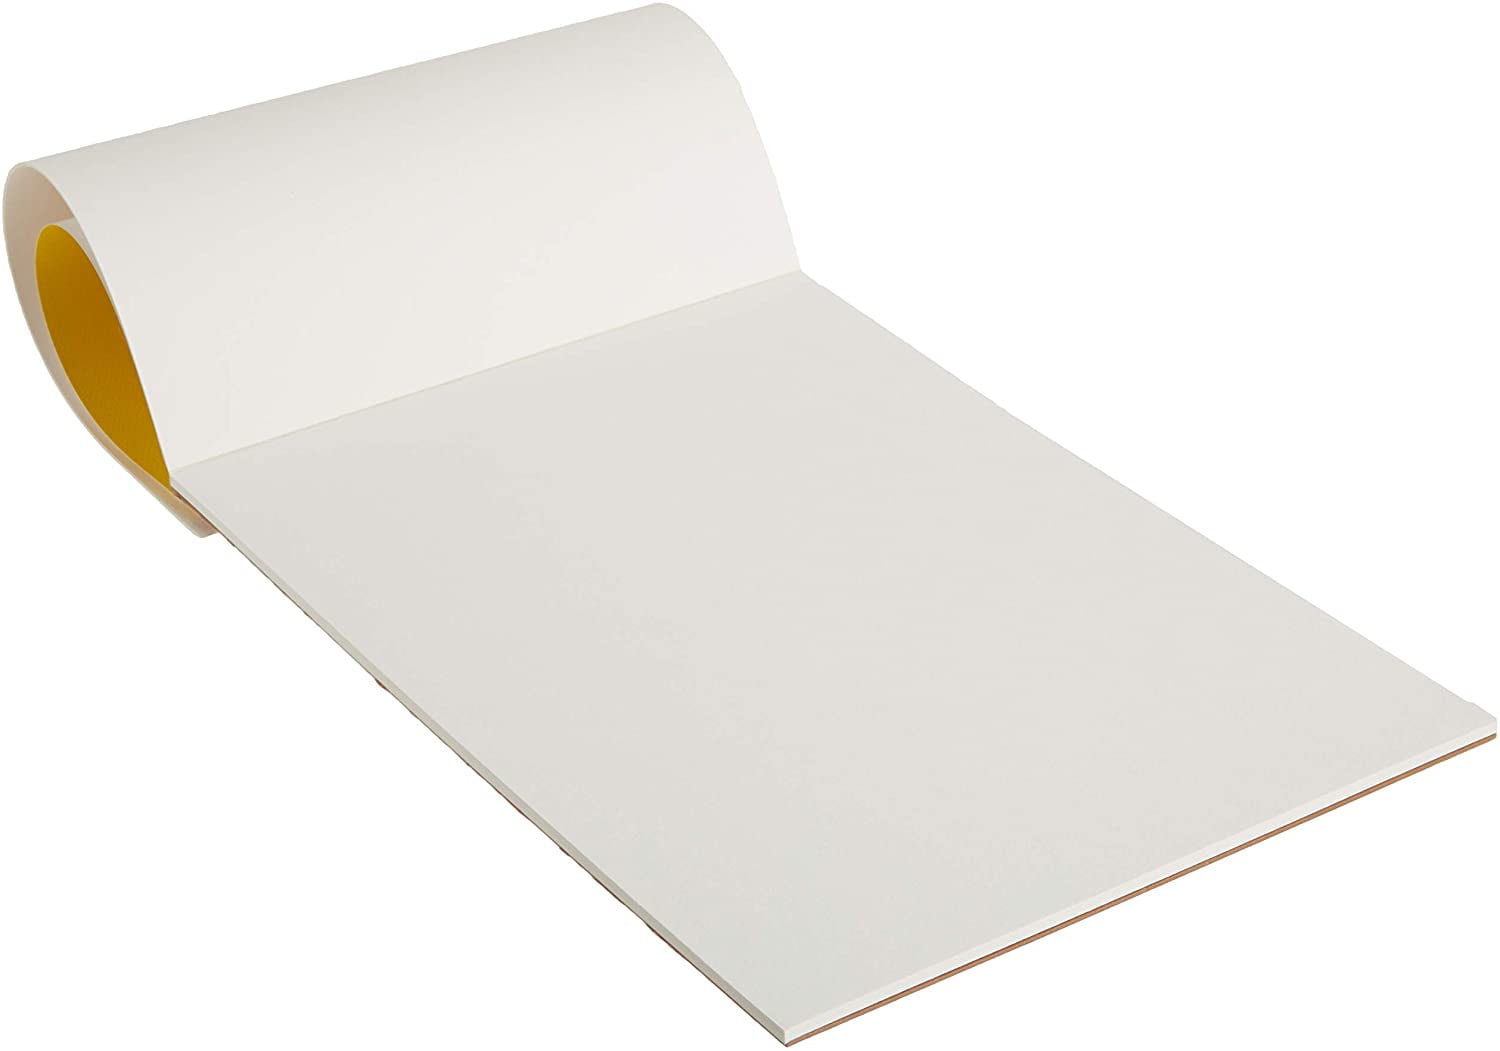 Strathmore 300 Series Palette Paper Pad, Tape Bound, 12x16 inches